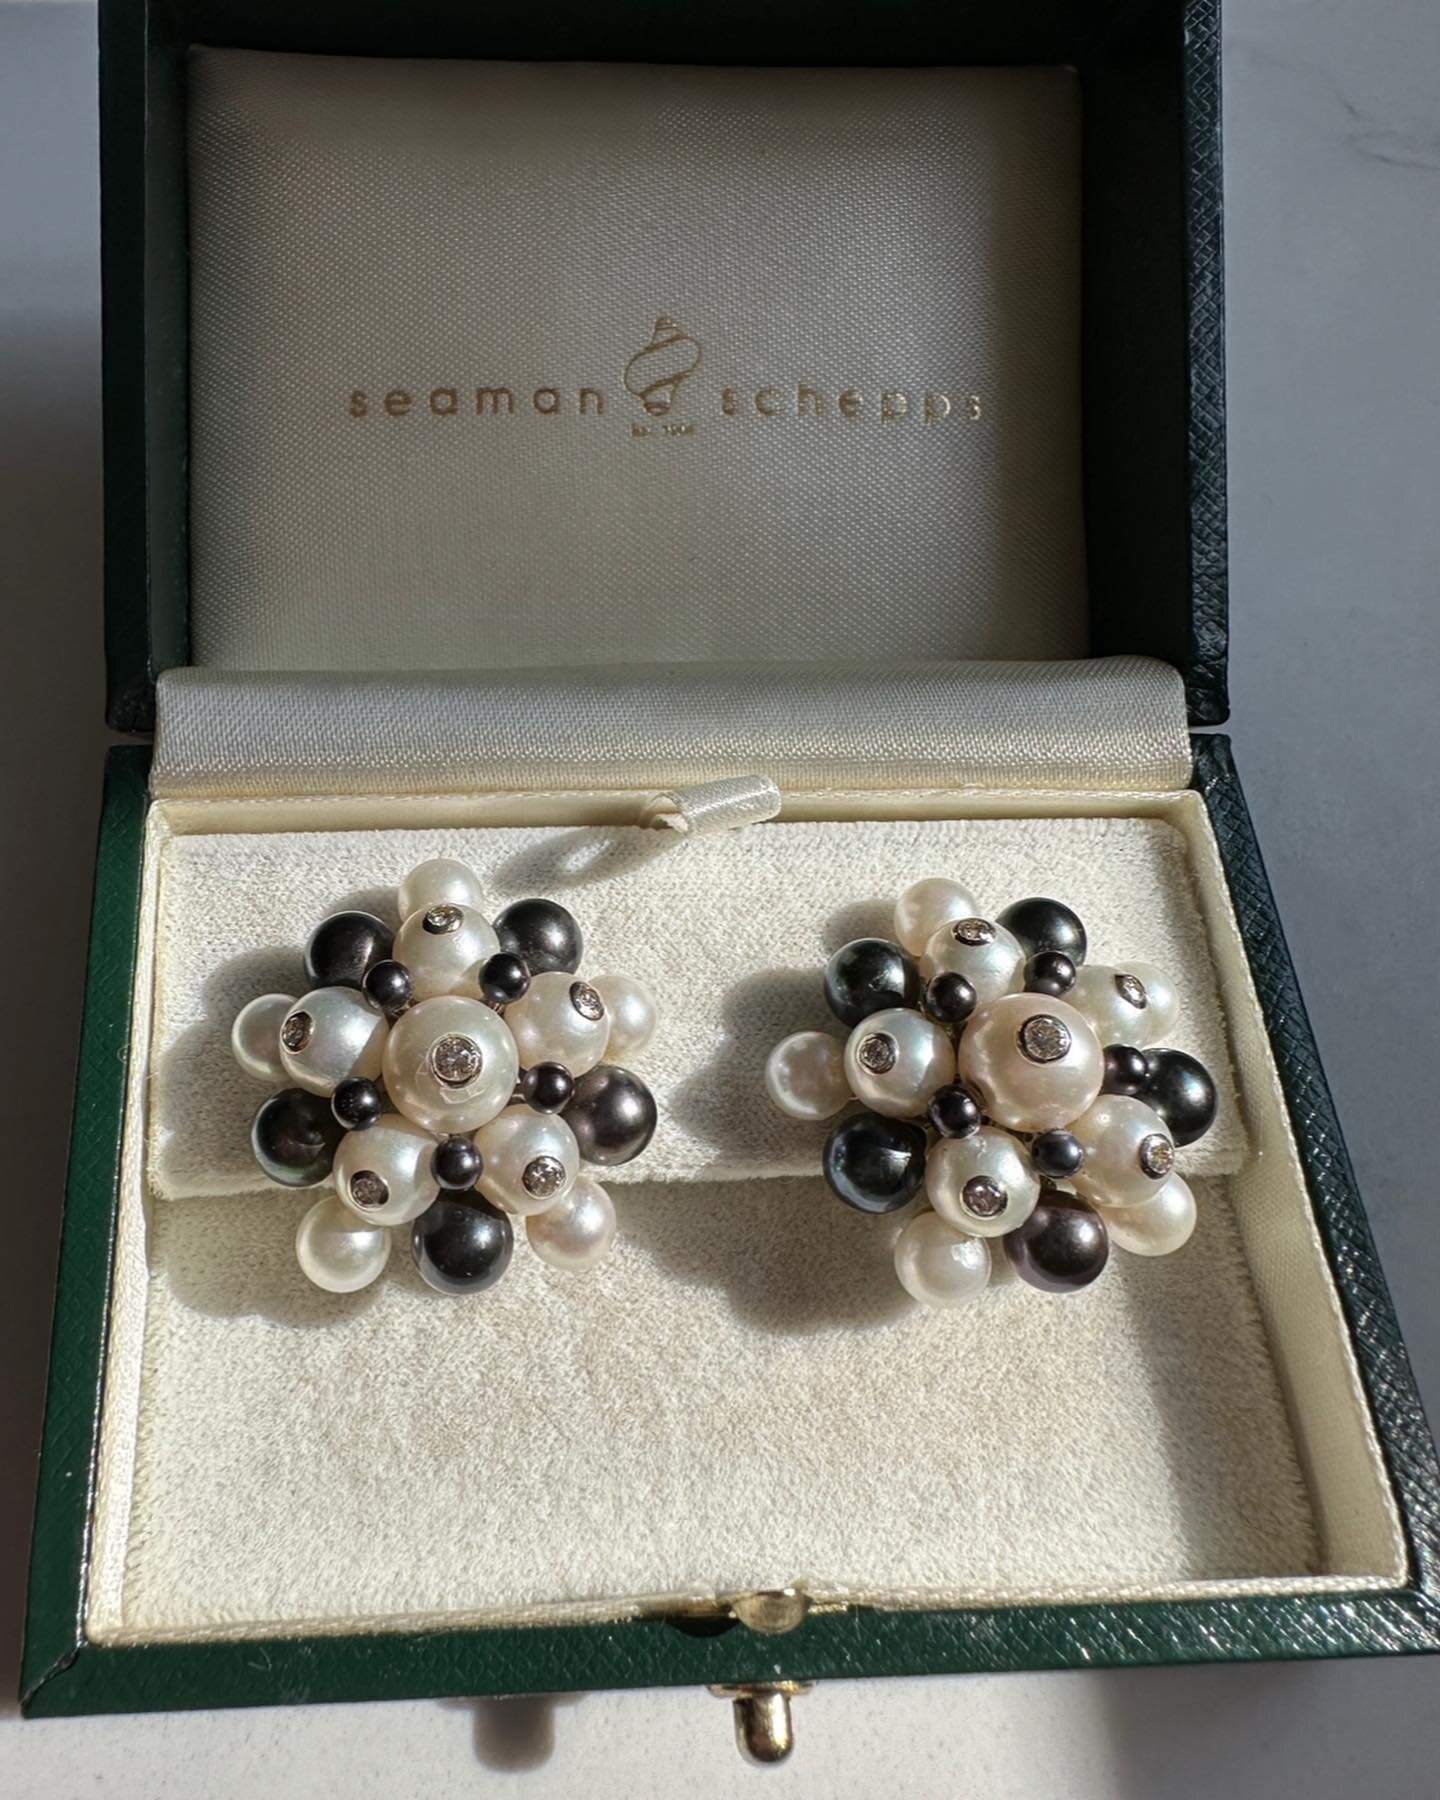 Beautiful cluster pearl ear clips by Seaman Schepps.
&hellip;
&hellip;
&hellip;

&ldquo;Inspired by sea Seaman Schepps (1881 &ndash; 1972)
Today, 50 years after his death, he continues to inspire modern jewelers. Even the name of the designer &ndash;